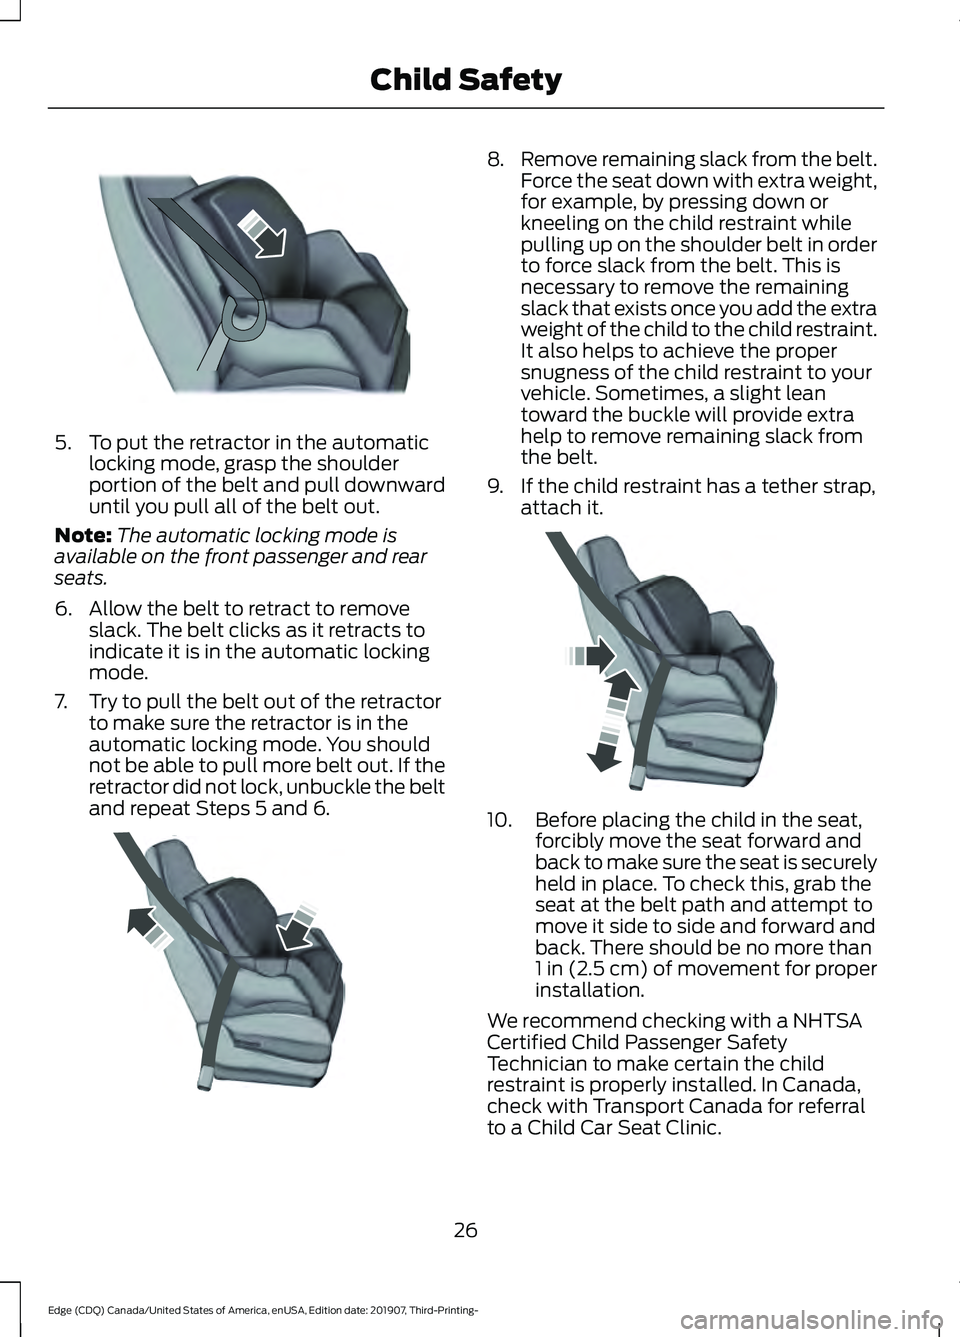 FORD EDGE 2020  Owners Manual 5. To put the retractor in the automatic
locking mode, grasp the shoulder
portion of the belt and pull downward
until you pull all of the belt out.
Note: The automatic locking mode is
available on the